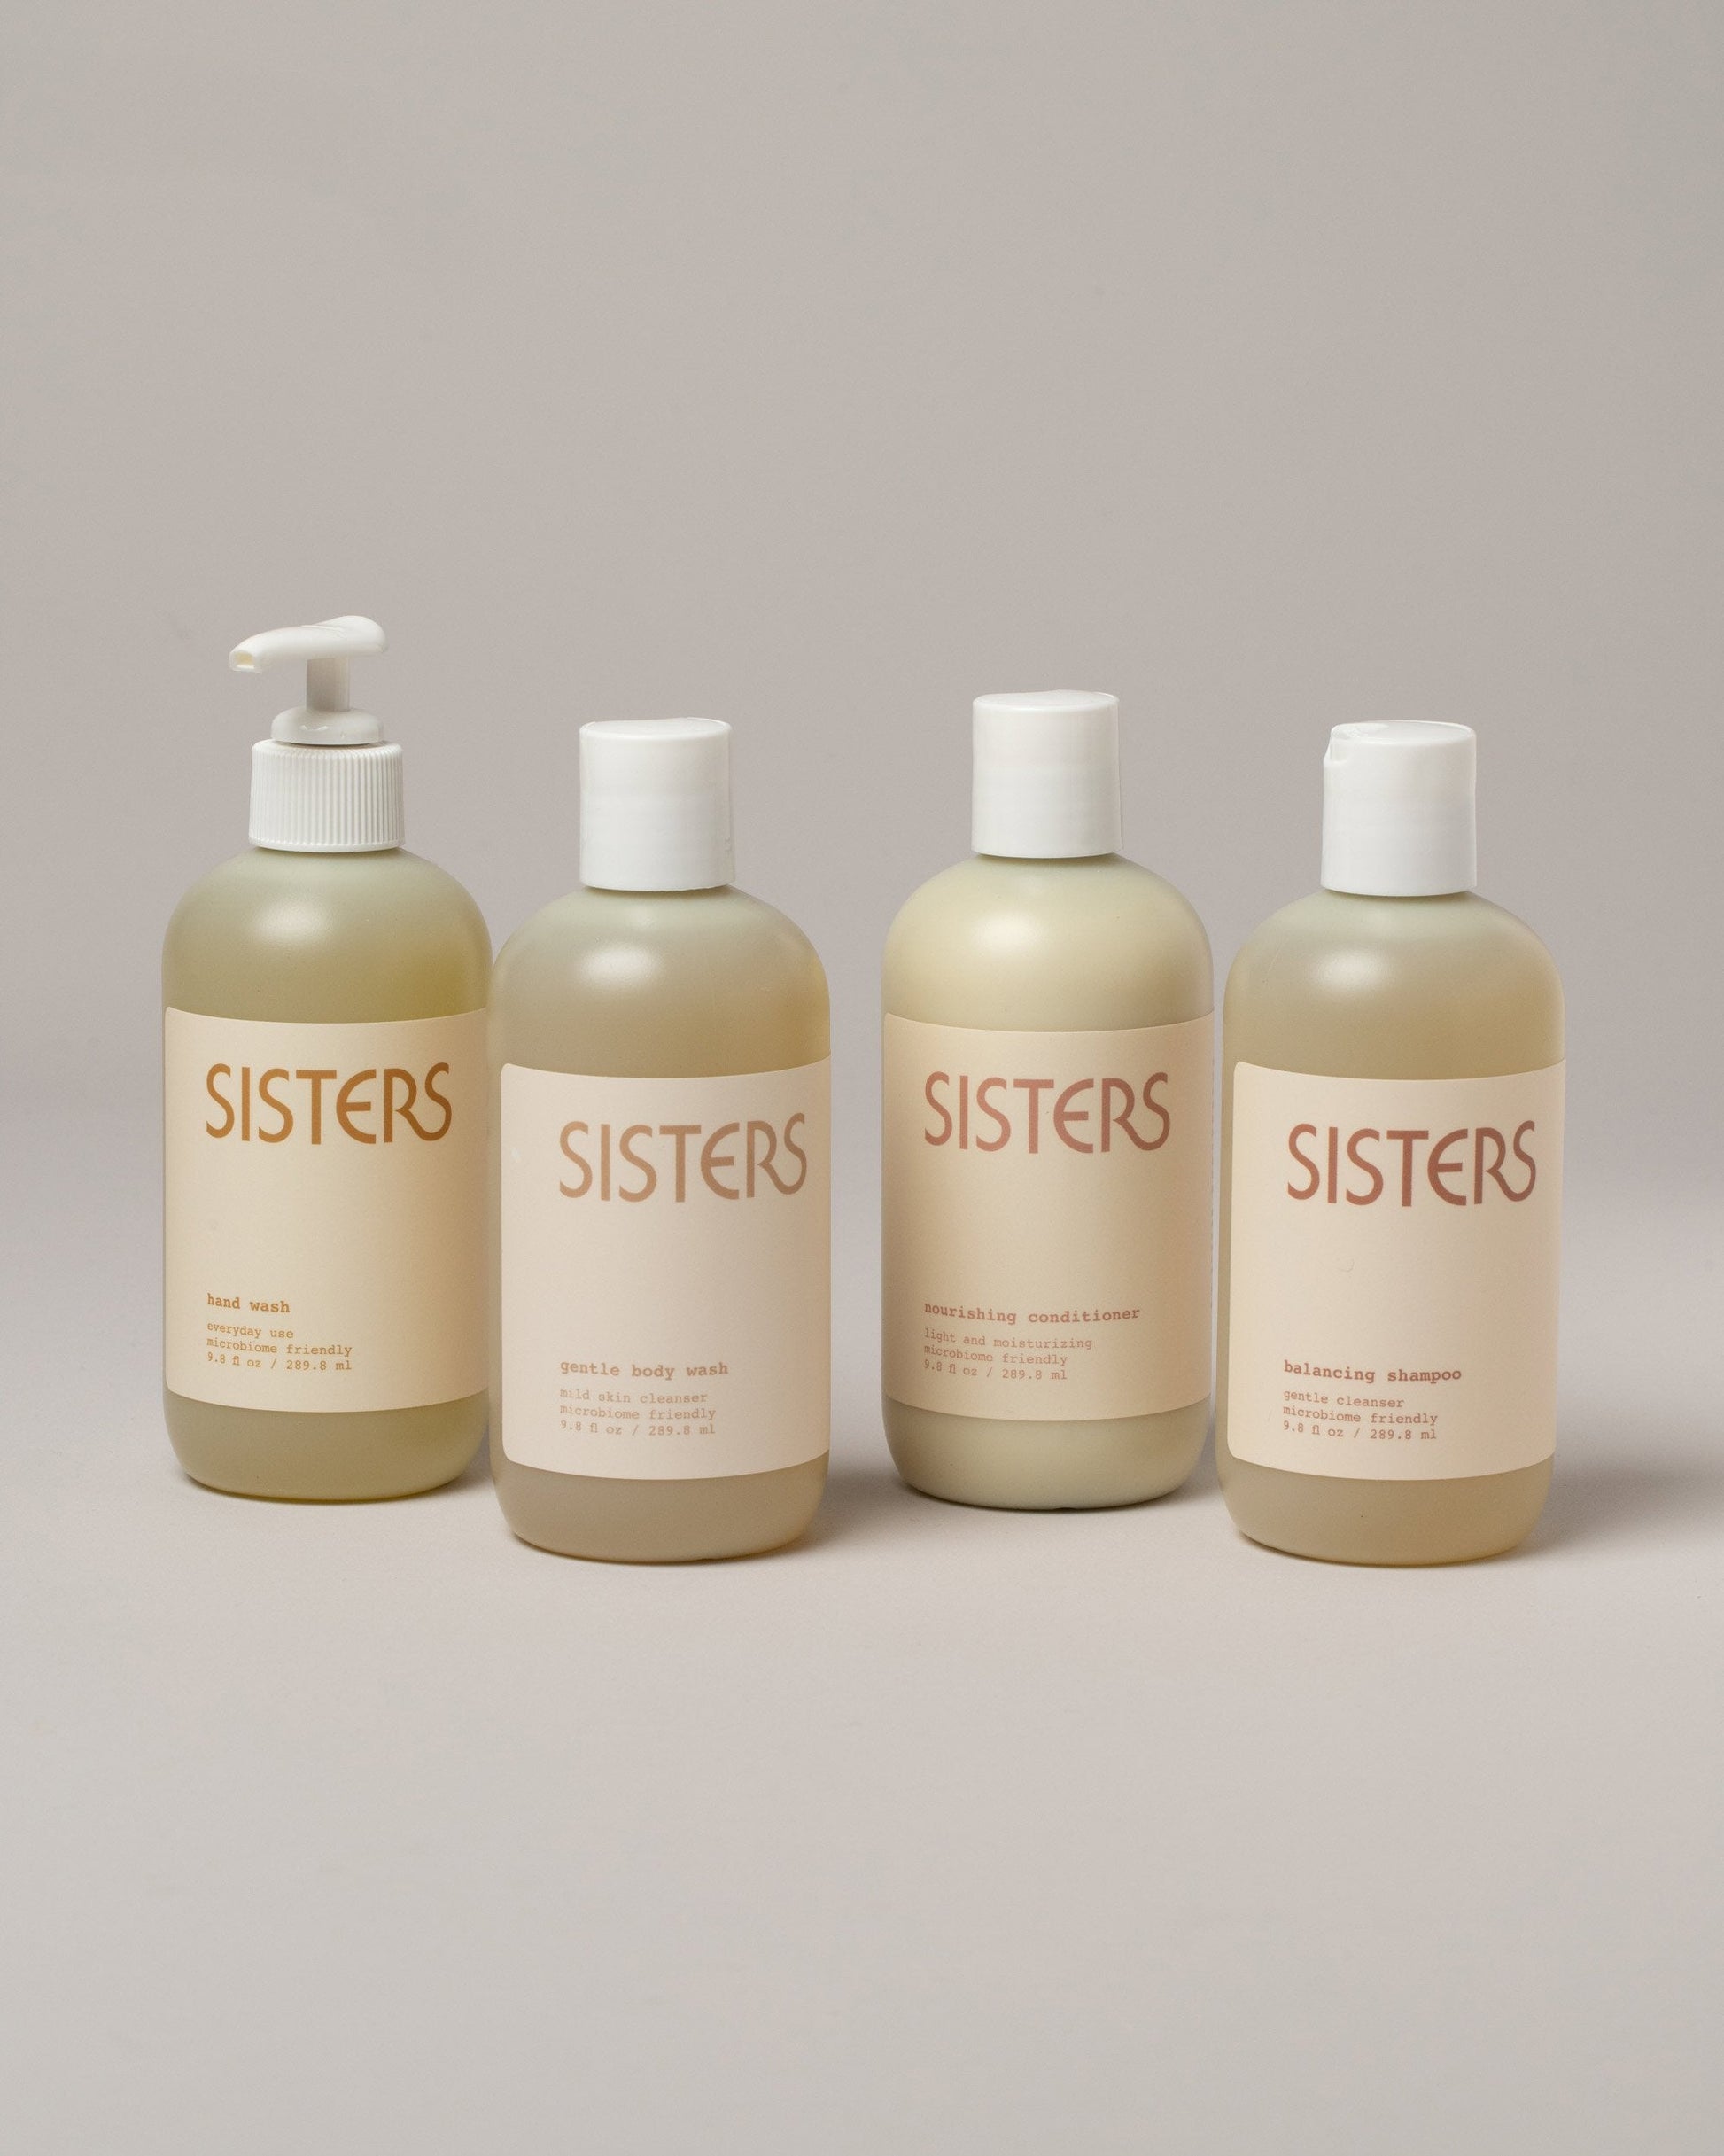 Sisters Body Hand Soap, Gentle Body Wash, Balancing Shampoo and Nourishing Conditioner on light color background.